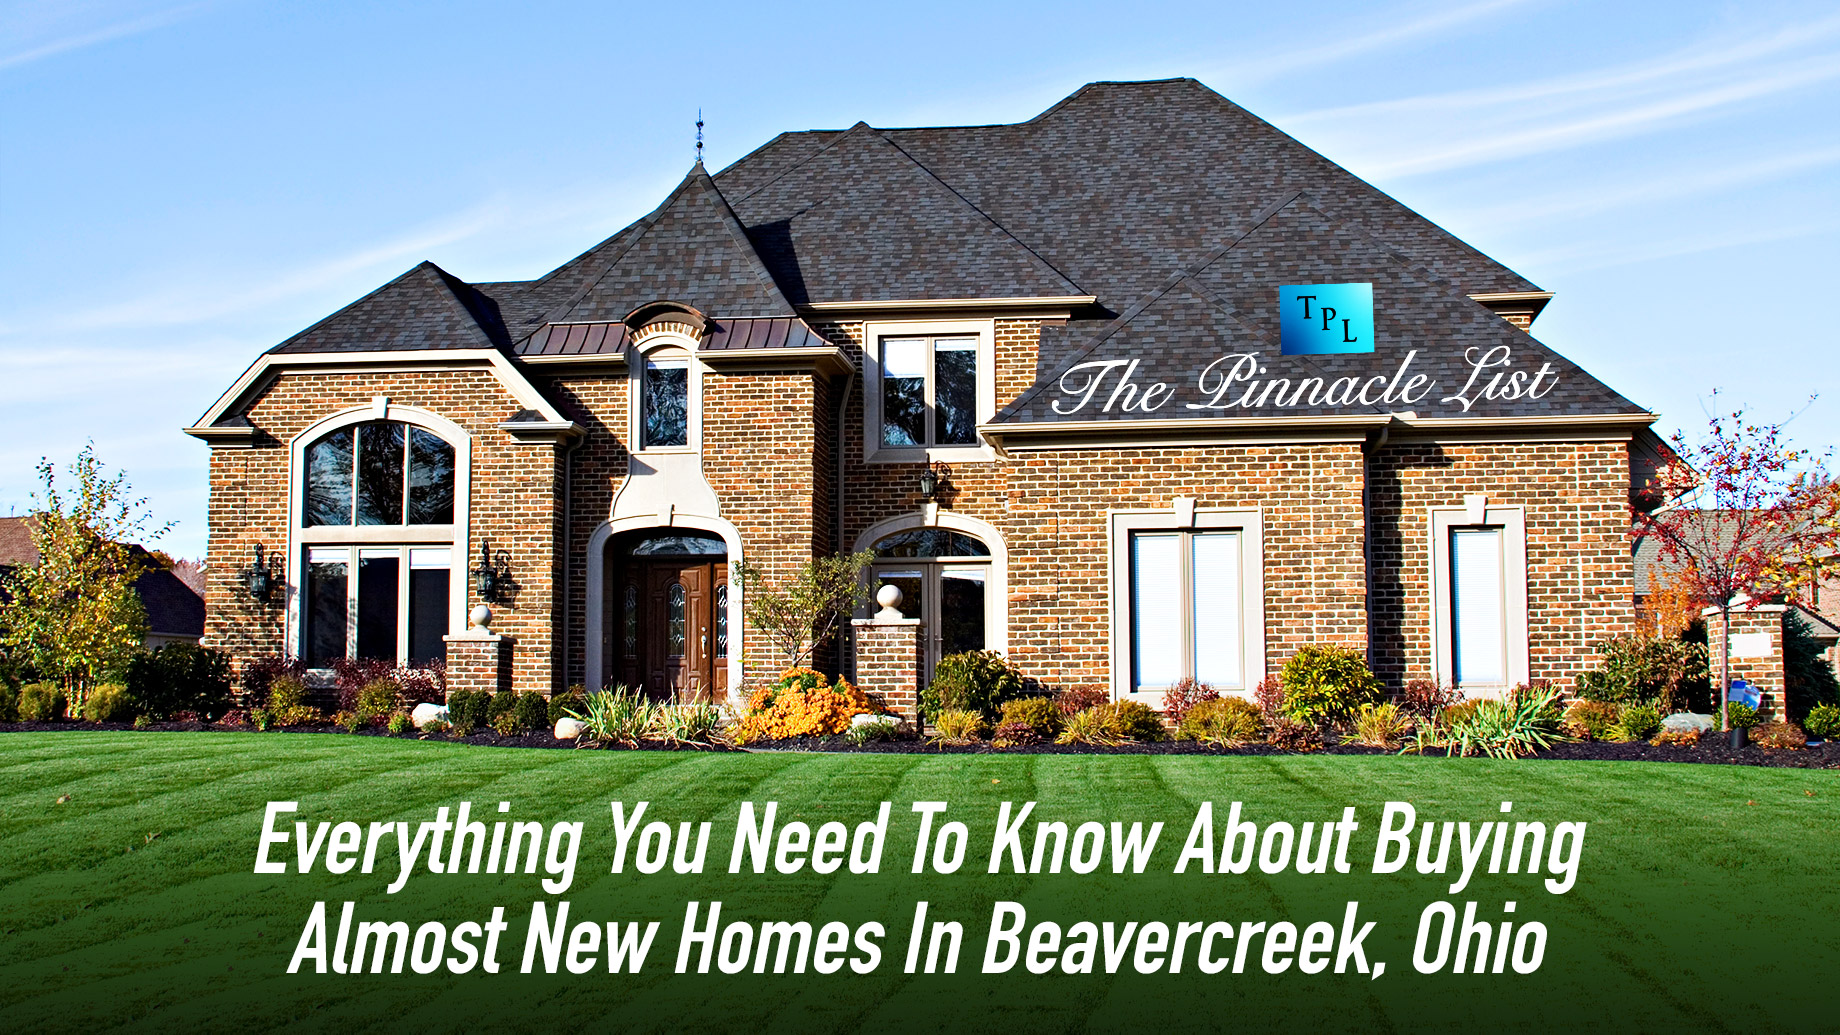 Everything You Need To Know About Buying Almost New Homes In Beavercreek, Ohio